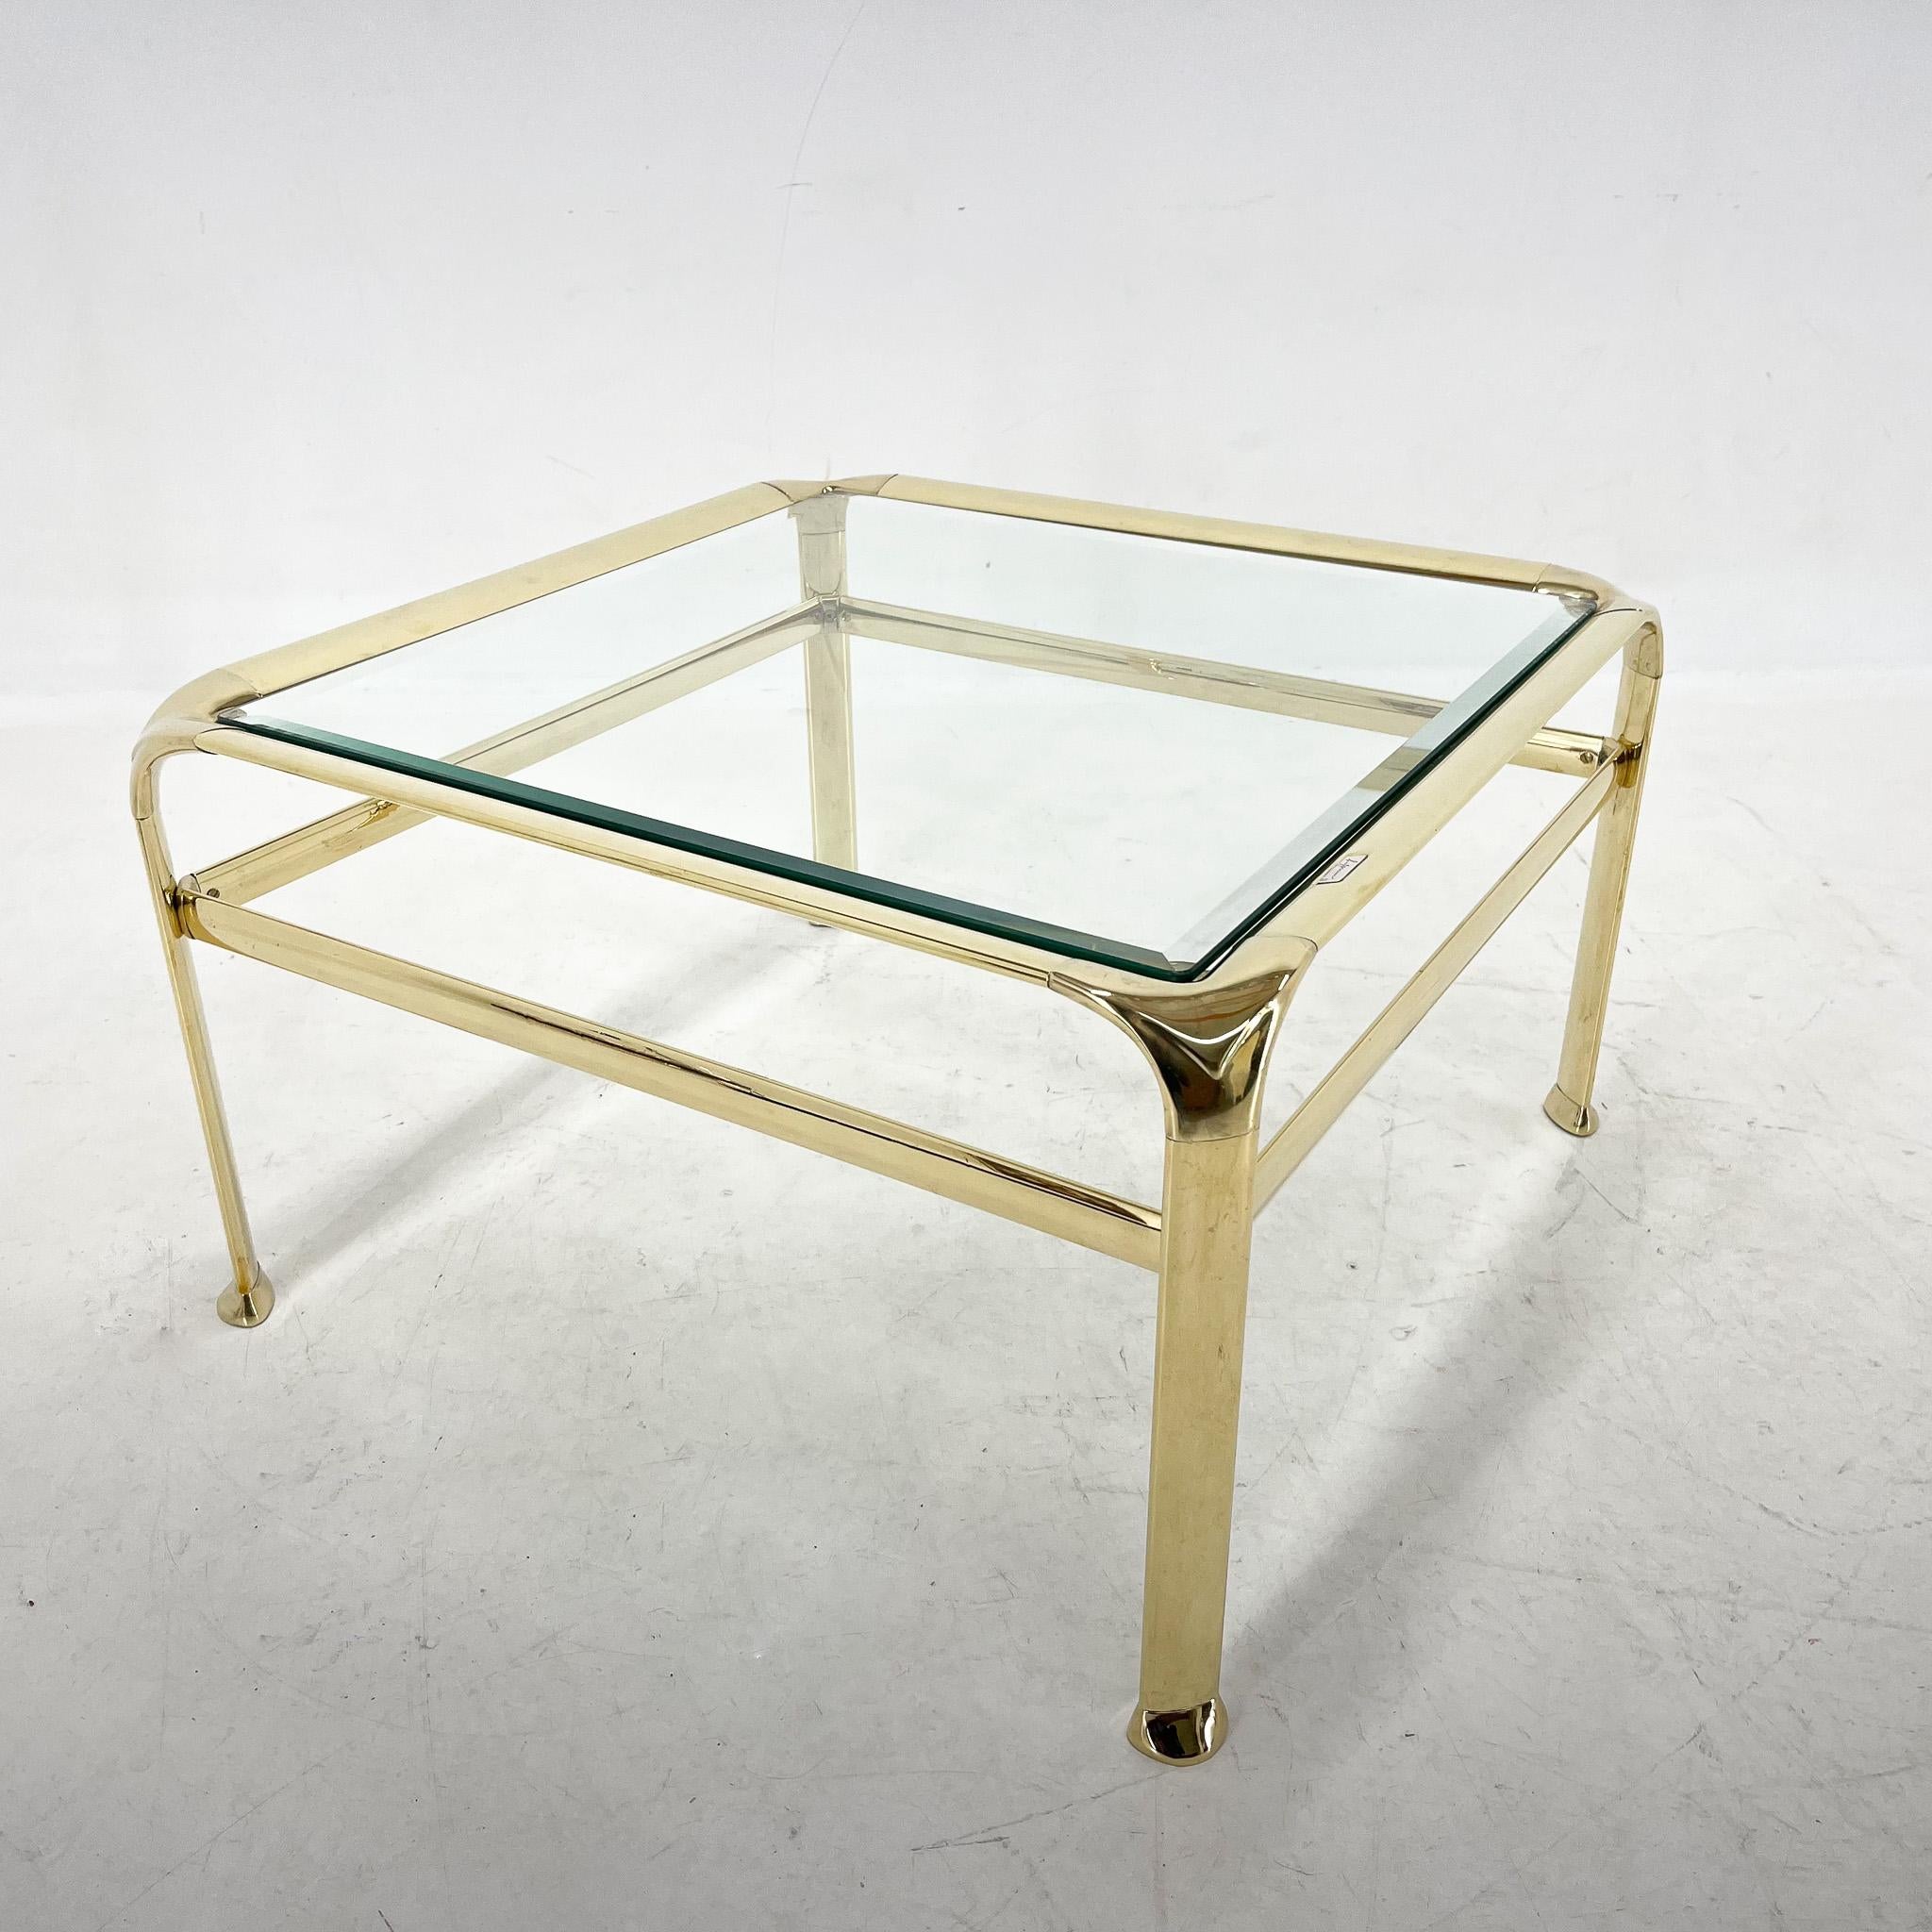 Mauro Lipparini Coffee Table, Brass & Glass, 1970's, Italy For Sale 5